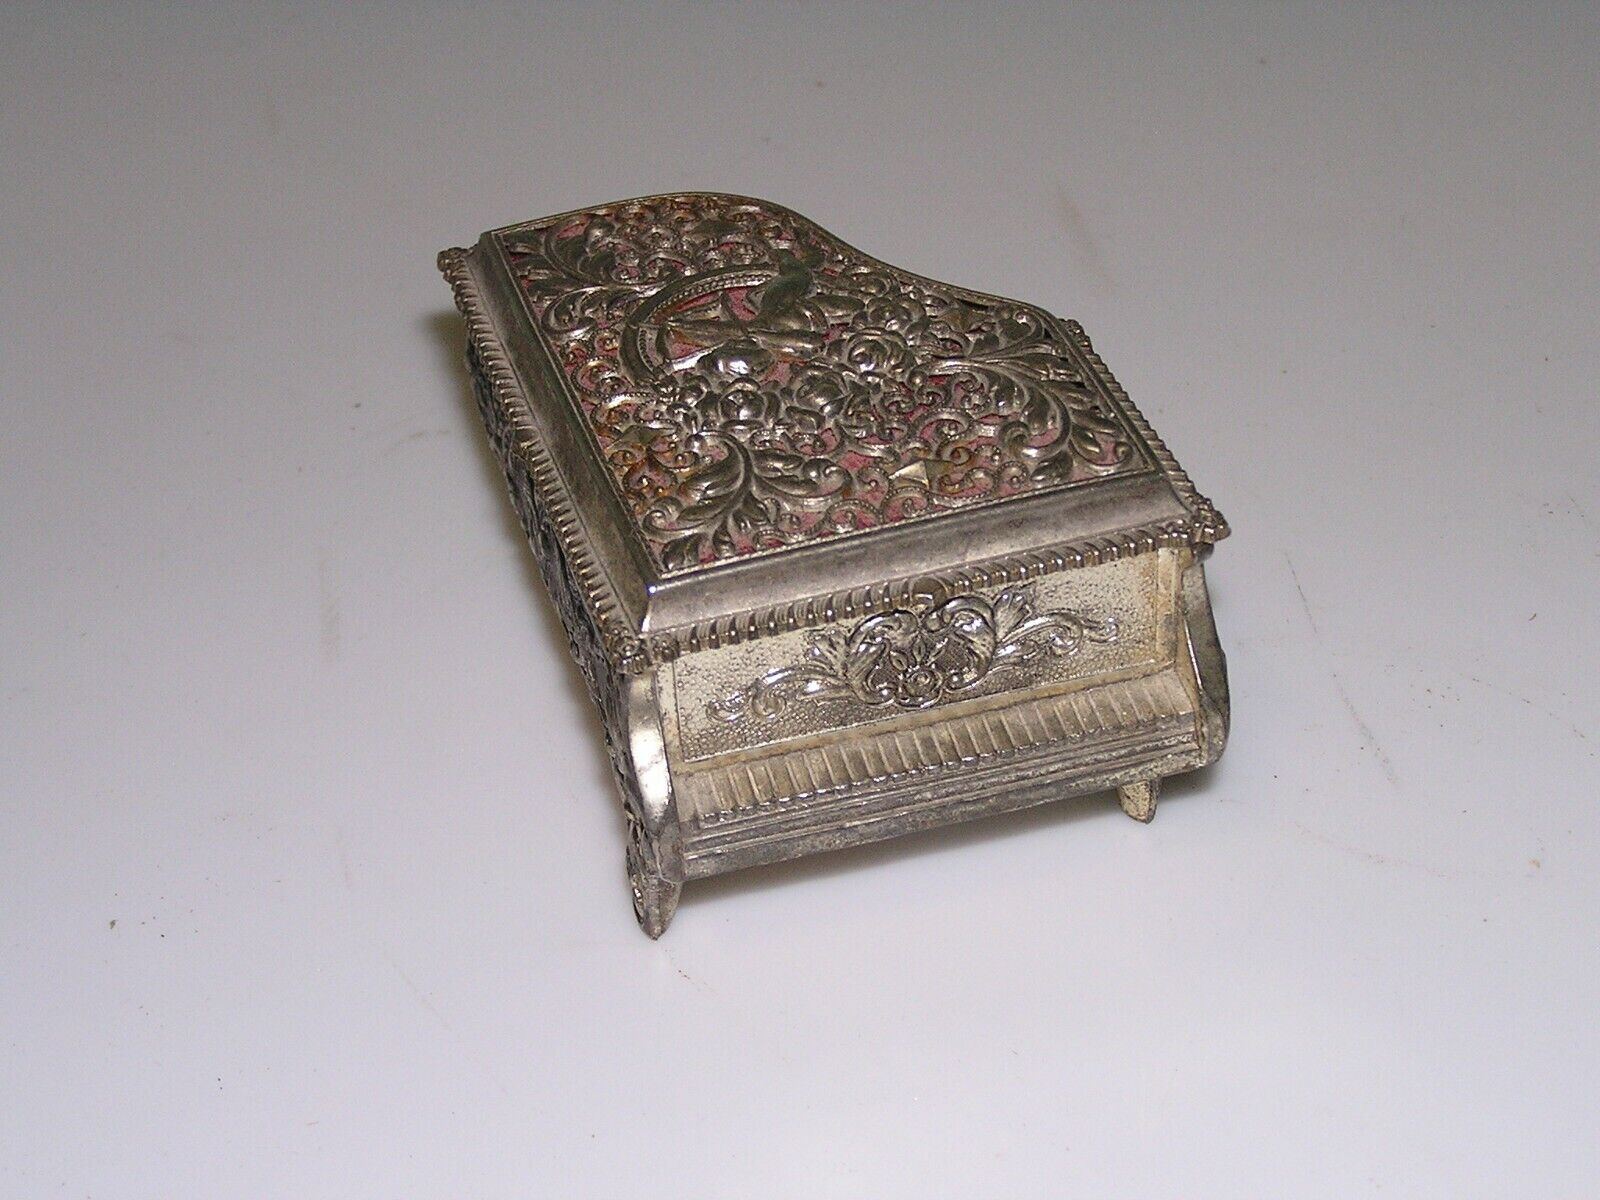 VINTAGE METAL PIANO MUSICAL JEWELRY MUSIC BOX WITH CUPID